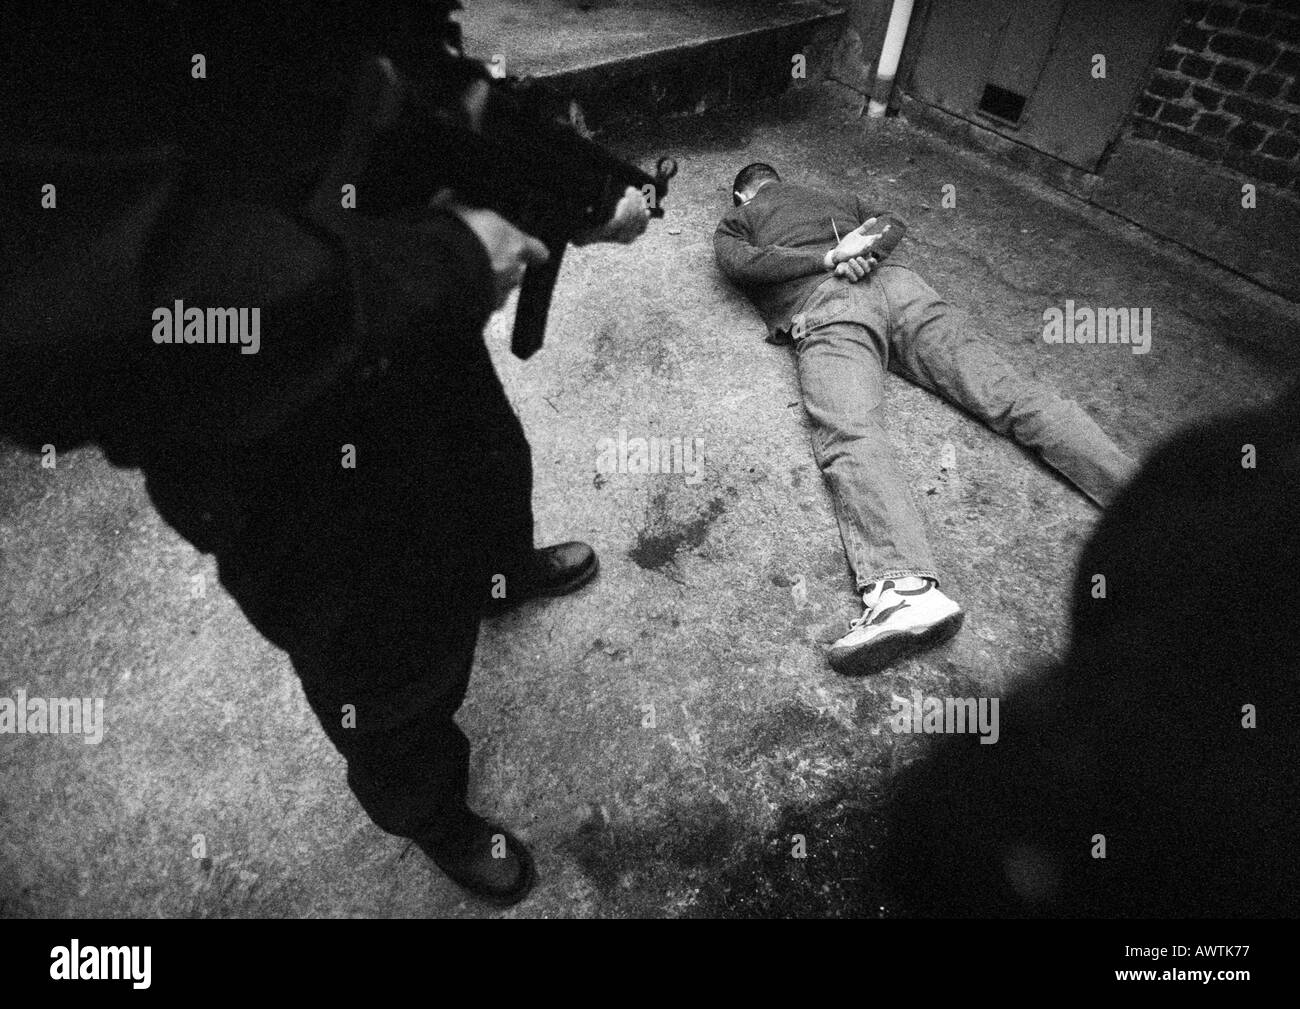 Man standing and pointing sub-machine gun at man face-down on floor, b&w Stock Photo